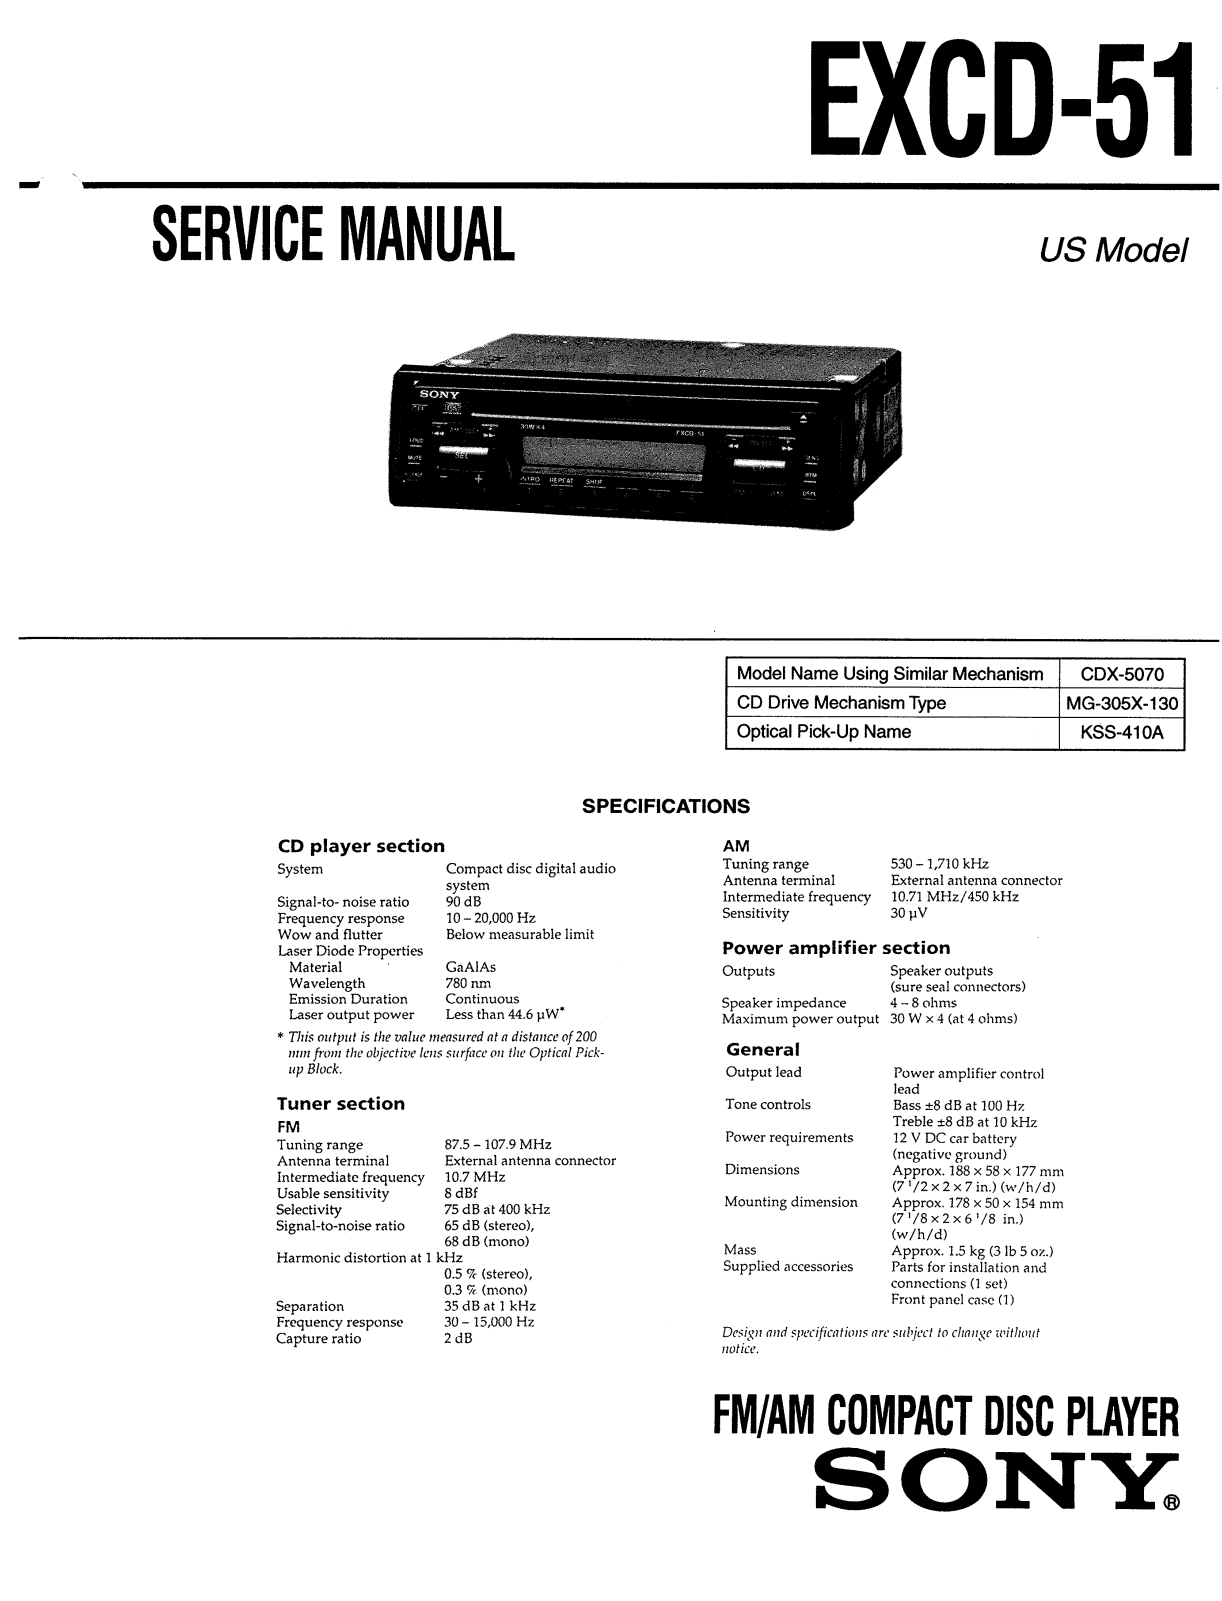 Sony EXCD-51 Service manual